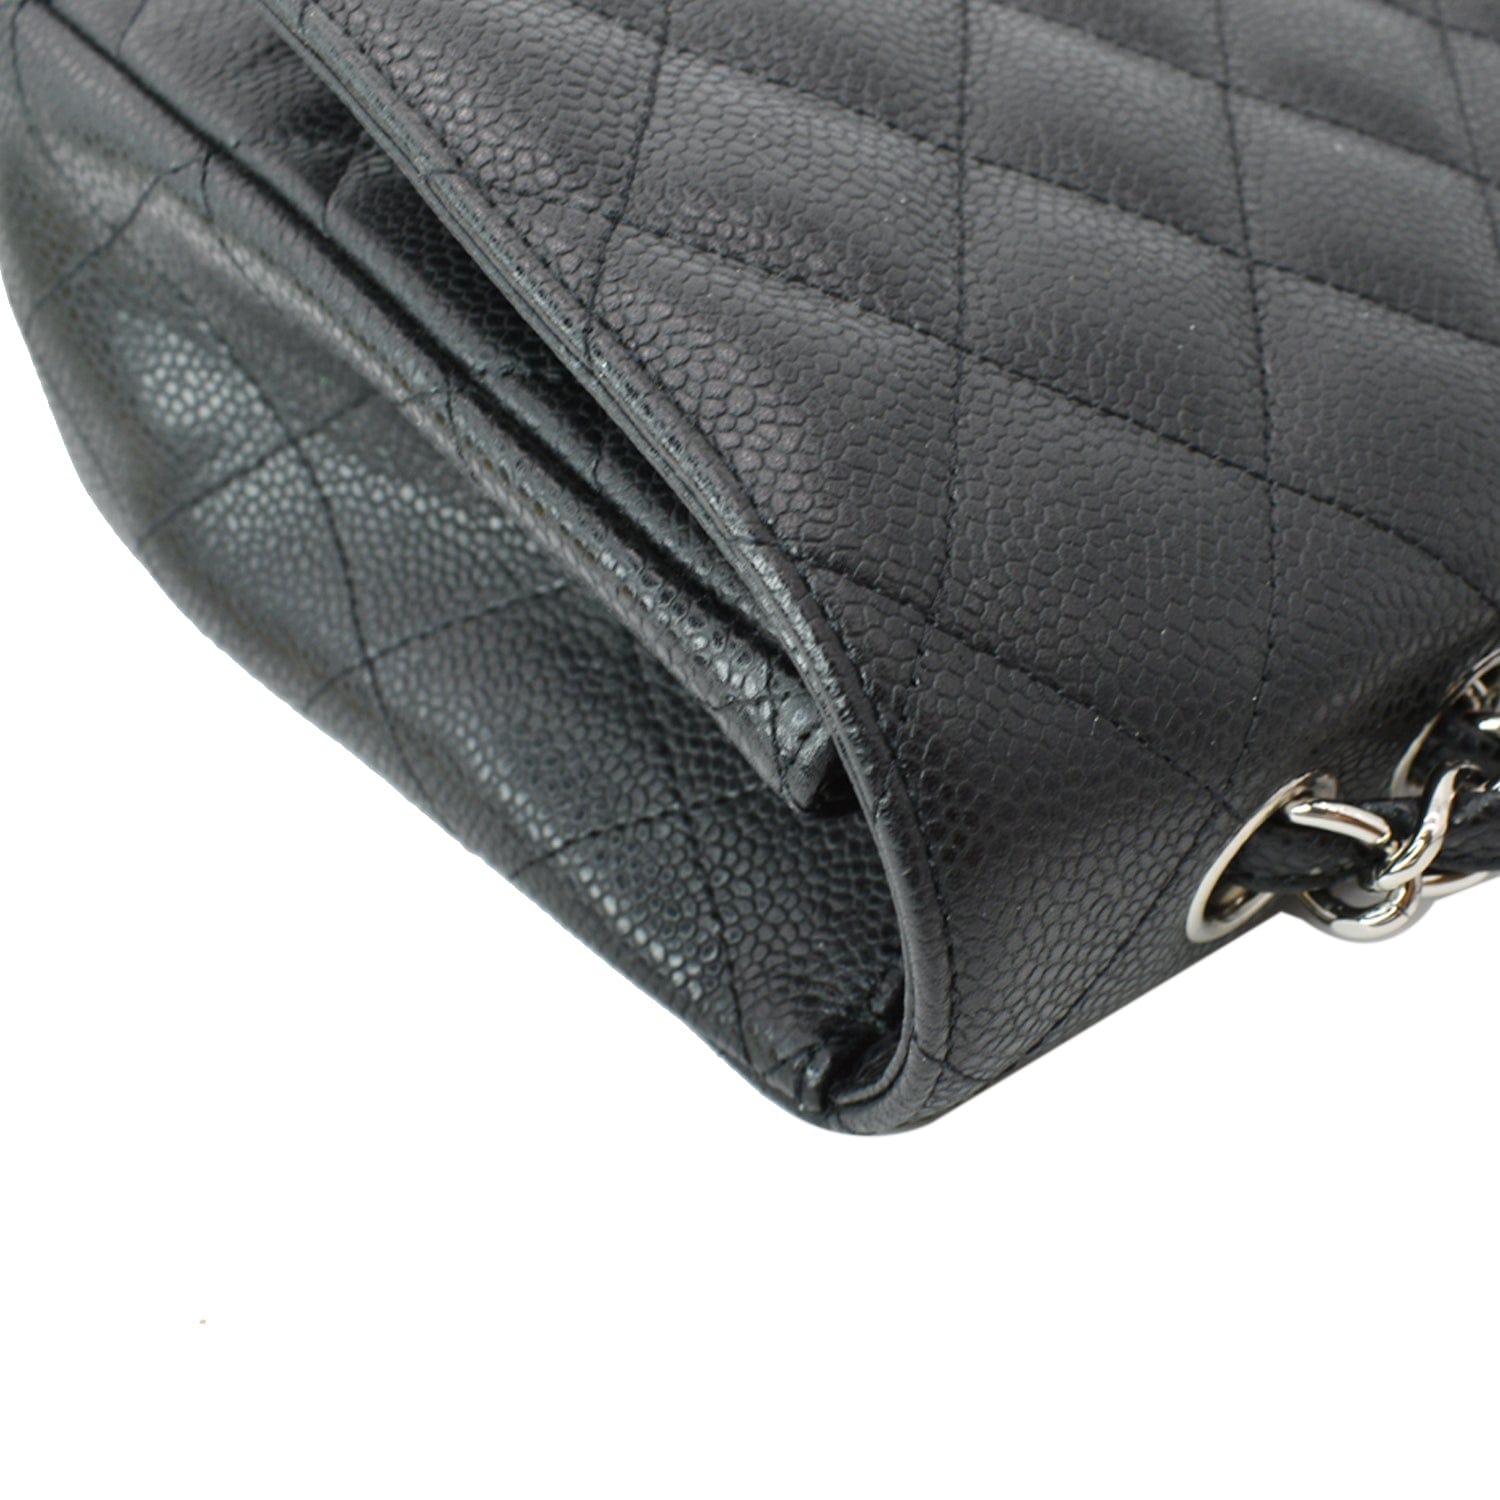 Sold at Auction: Chanel - a jumbo XL single flap bag in black